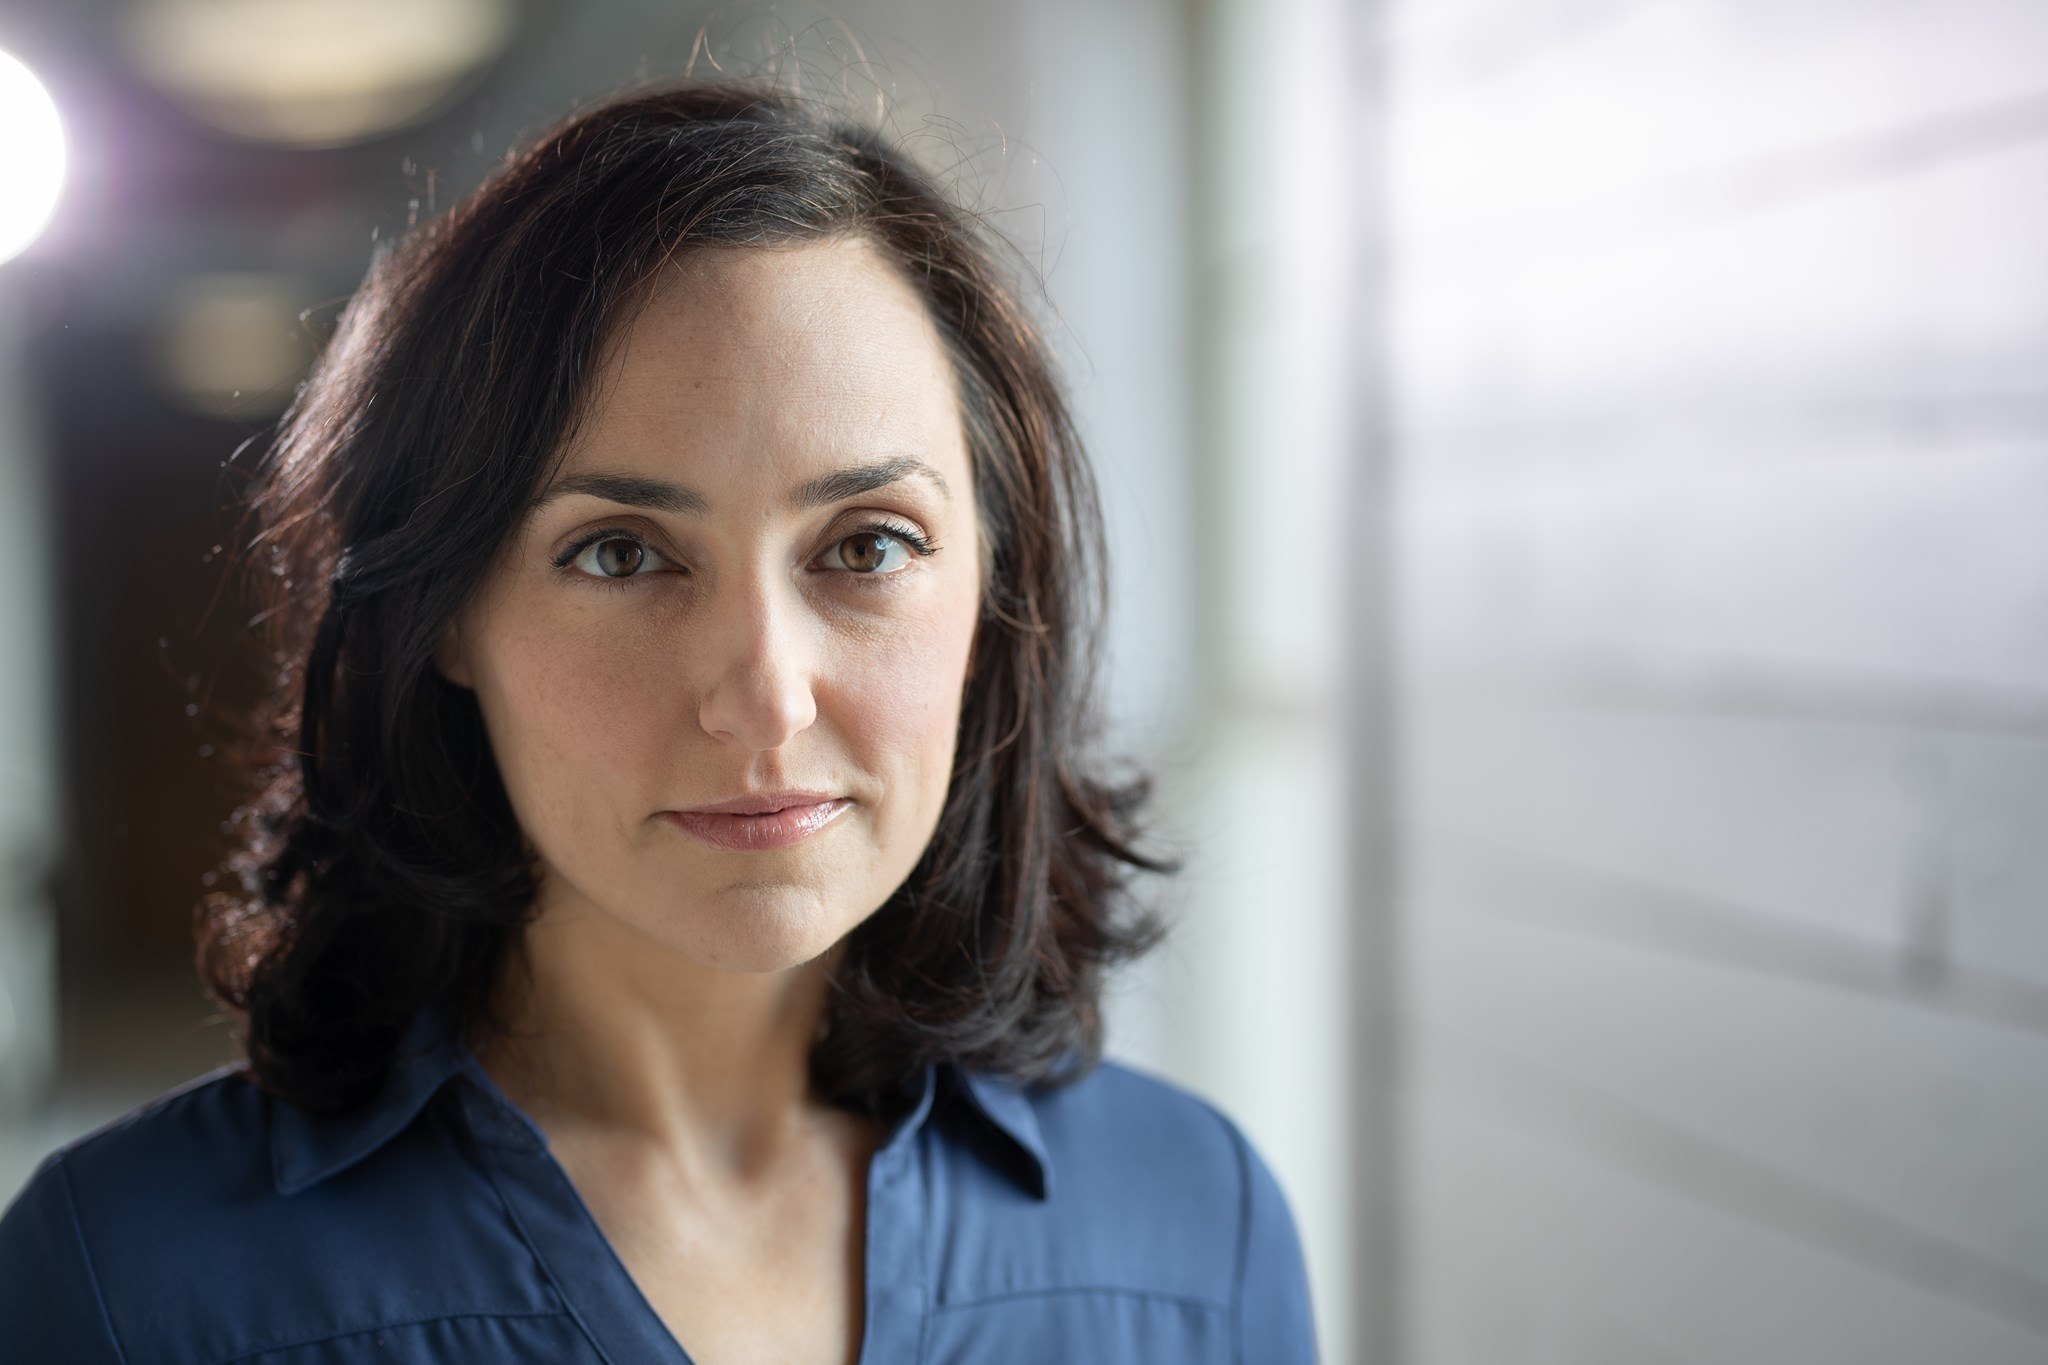 Next Act Theatre Promotes Libby Amato to Managing Director